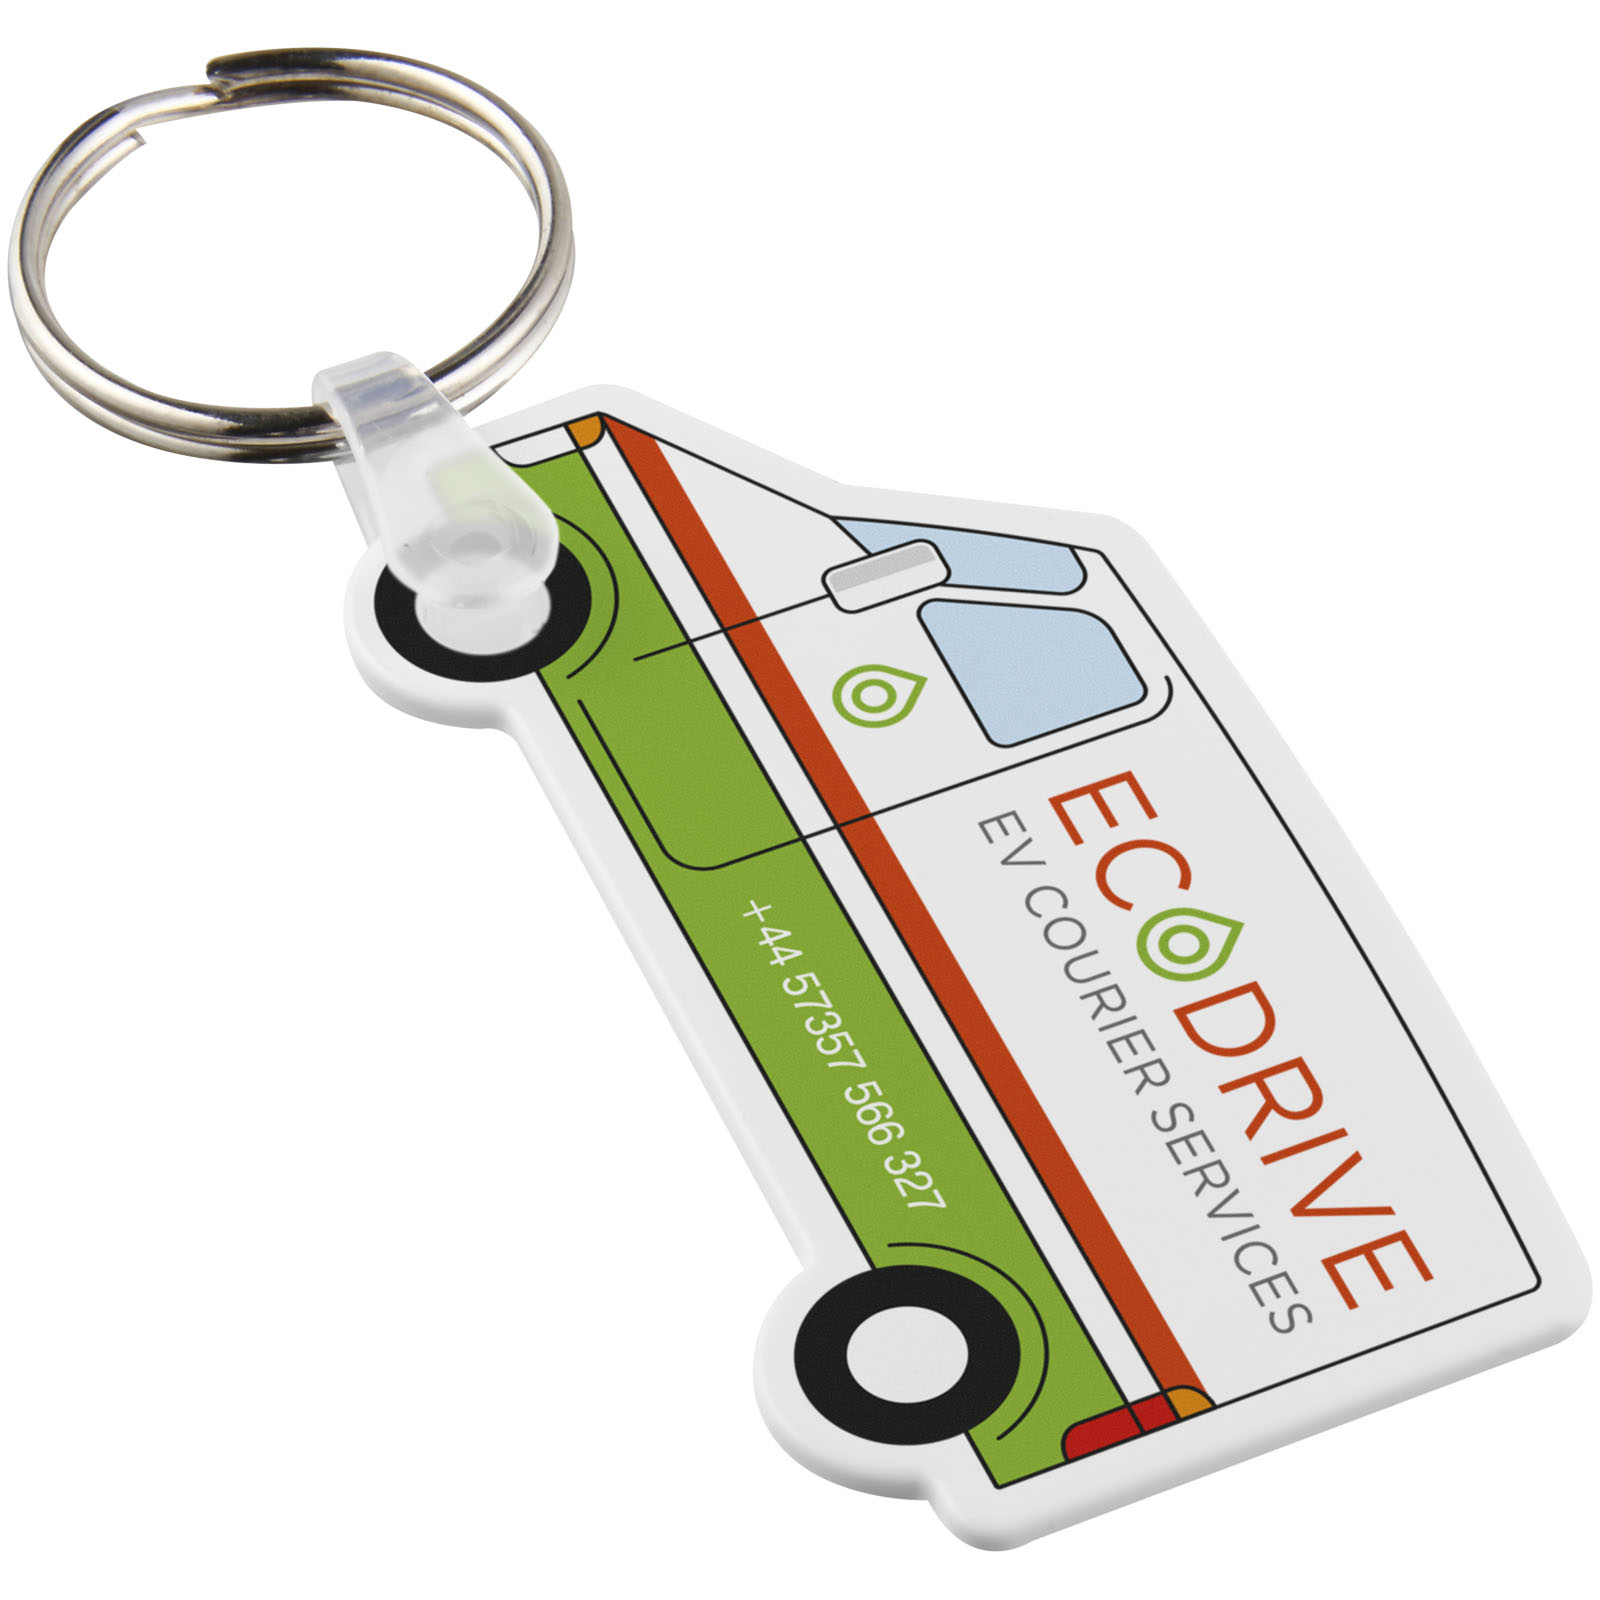 Advertising Keychains & Keyrings - Tait van-shaped recycled keychain